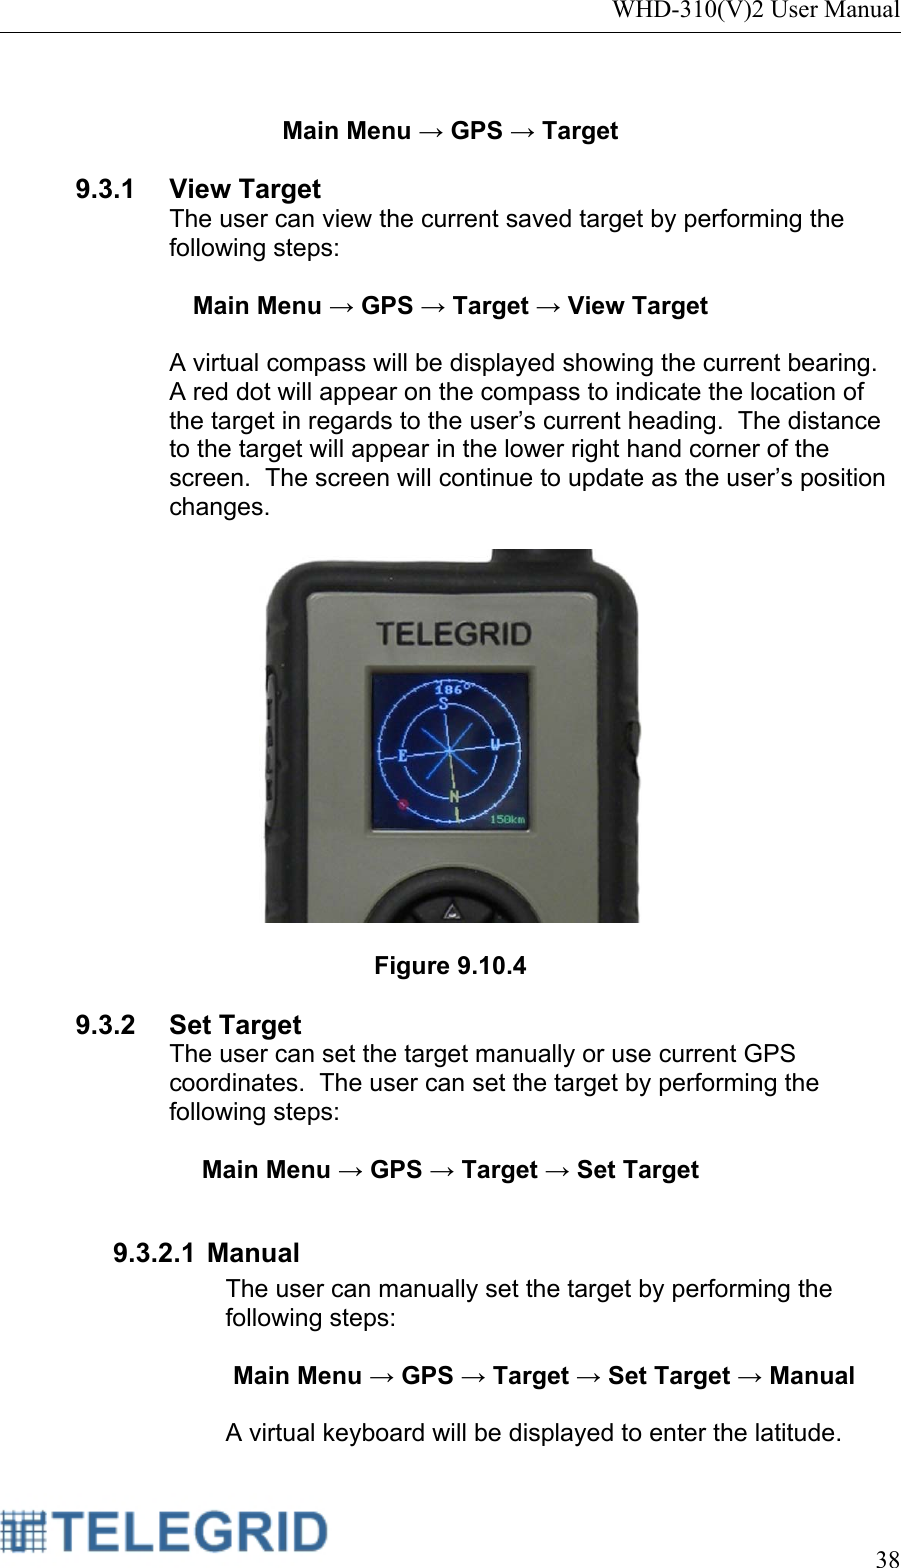 WHD-310(V)2 User Manual     38   Main Menu → GPS → Target  9.3.1 View Target The user can view the current saved target by performing the following steps:  Main Menu → GPS → Target → View Target  A virtual compass will be displayed showing the current bearing.  A red dot will appear on the compass to indicate the location of the target in regards to the user’s current heading.  The distance to the target will appear in the lower right hand corner of the screen.  The screen will continue to update as the user’s position changes.    Figure 9.10.4  9.3.2 Set Target The user can set the target manually or use current GPS coordinates.  The user can set the target by performing the following steps:  Main Menu → GPS → Target → Set Target  9.3.2.1 Manual The user can manually set the target by performing the following steps:  Main Menu → GPS → Target → Set Target → Manual  A virtual keyboard will be displayed to enter the latitude.   